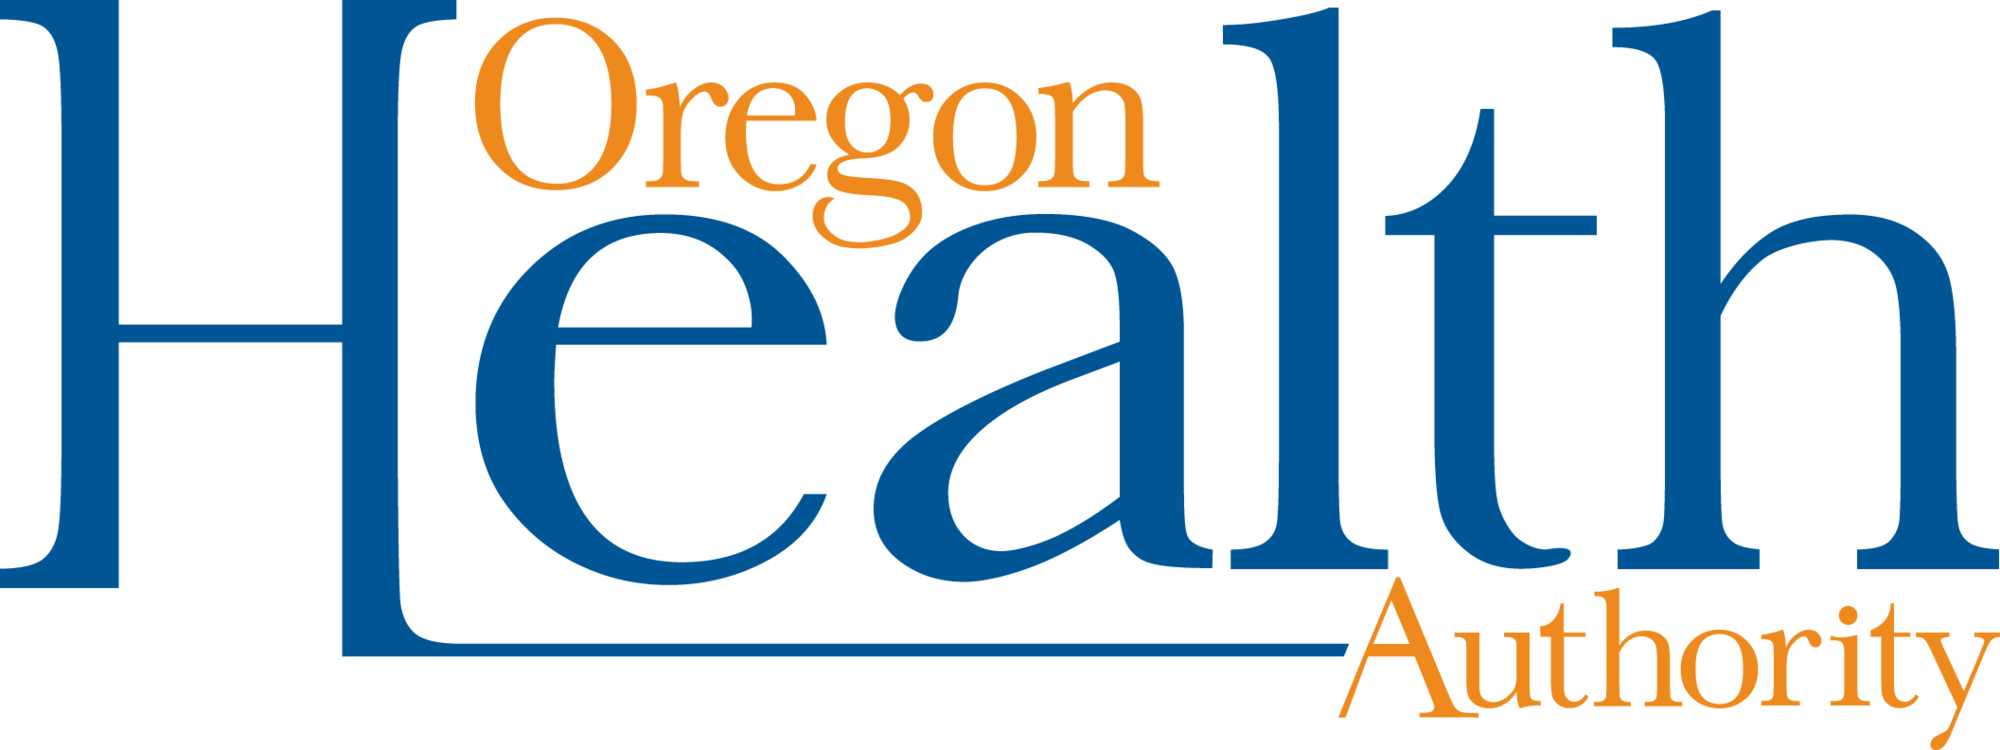 Recommendation on additional vaccine dose for immunocompromised people in Oregon